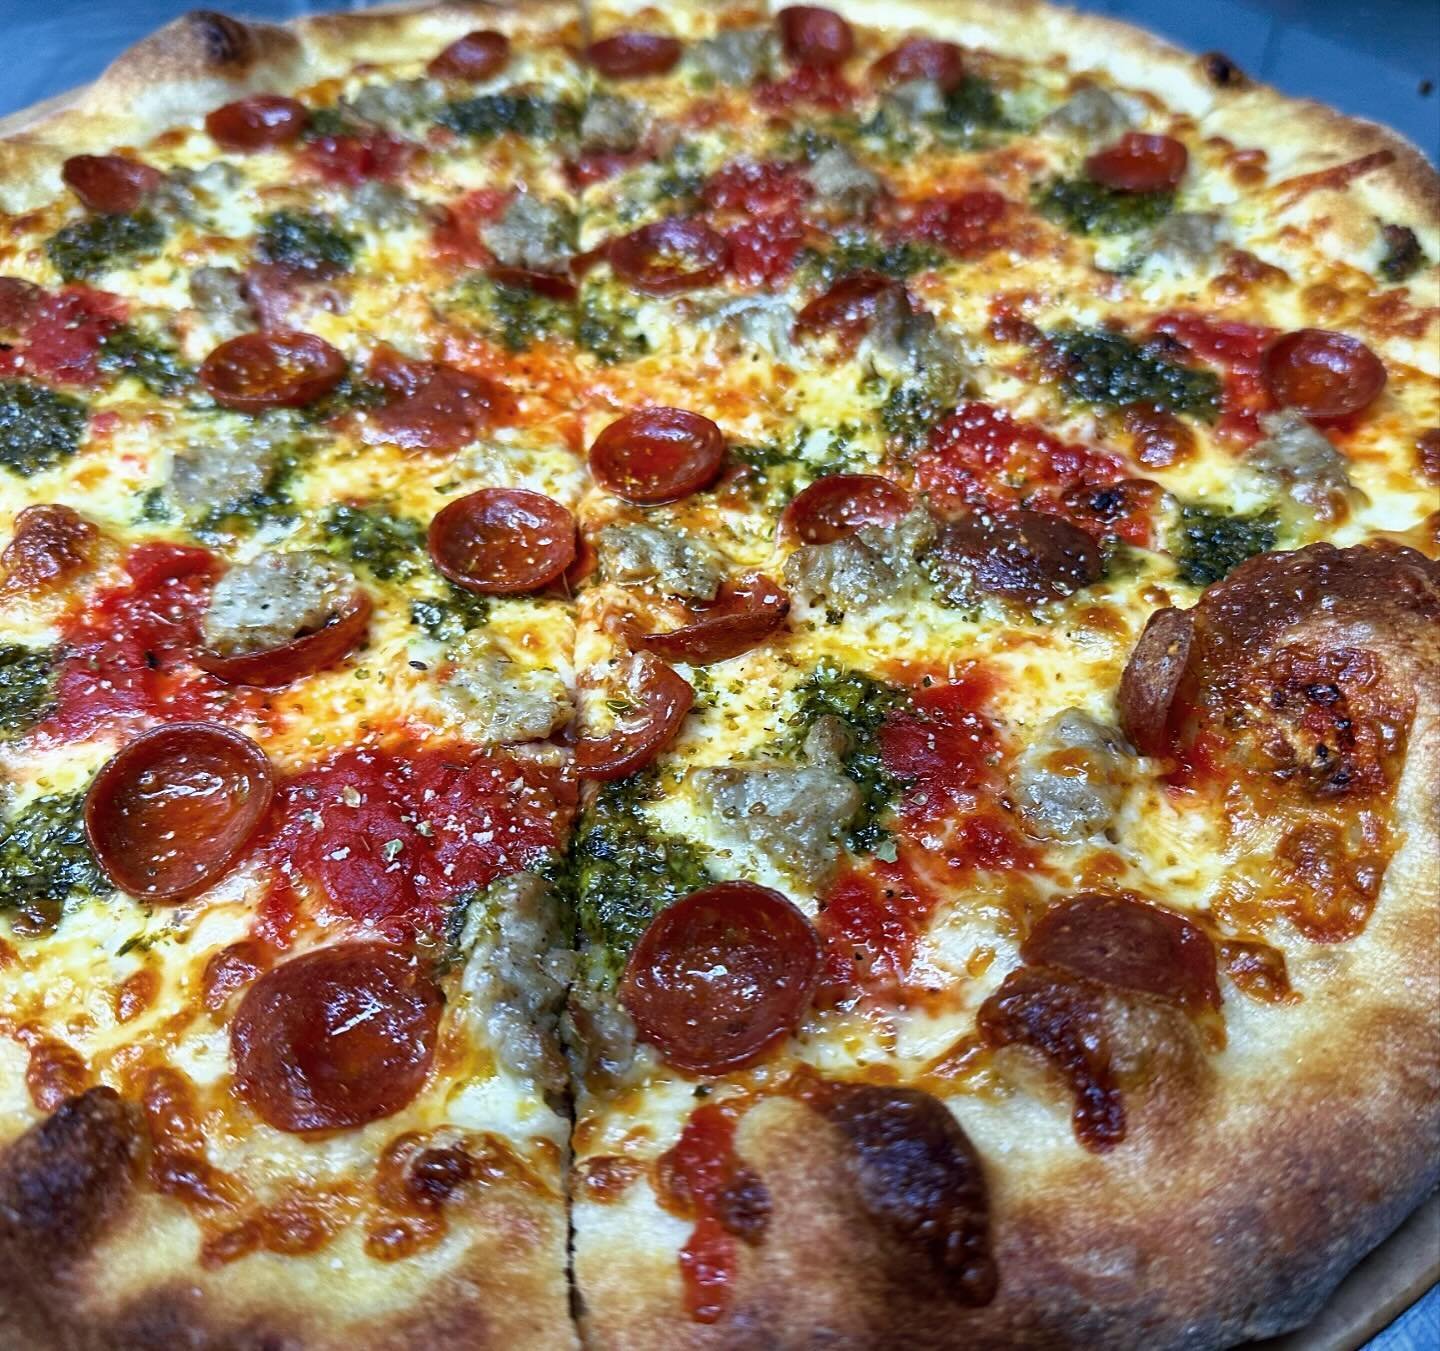 Y&rsquo;all like pesto?! 💚 We&rsquo;ve got a limited special pizza this week (or until it&rsquo;s gone!) featuring scratch made pistachio pesto 🤤. Pepperoni with scratch made Italian sausage, pistachio pesto, and red sauce. 

👉 Don&rsquo;t forget 